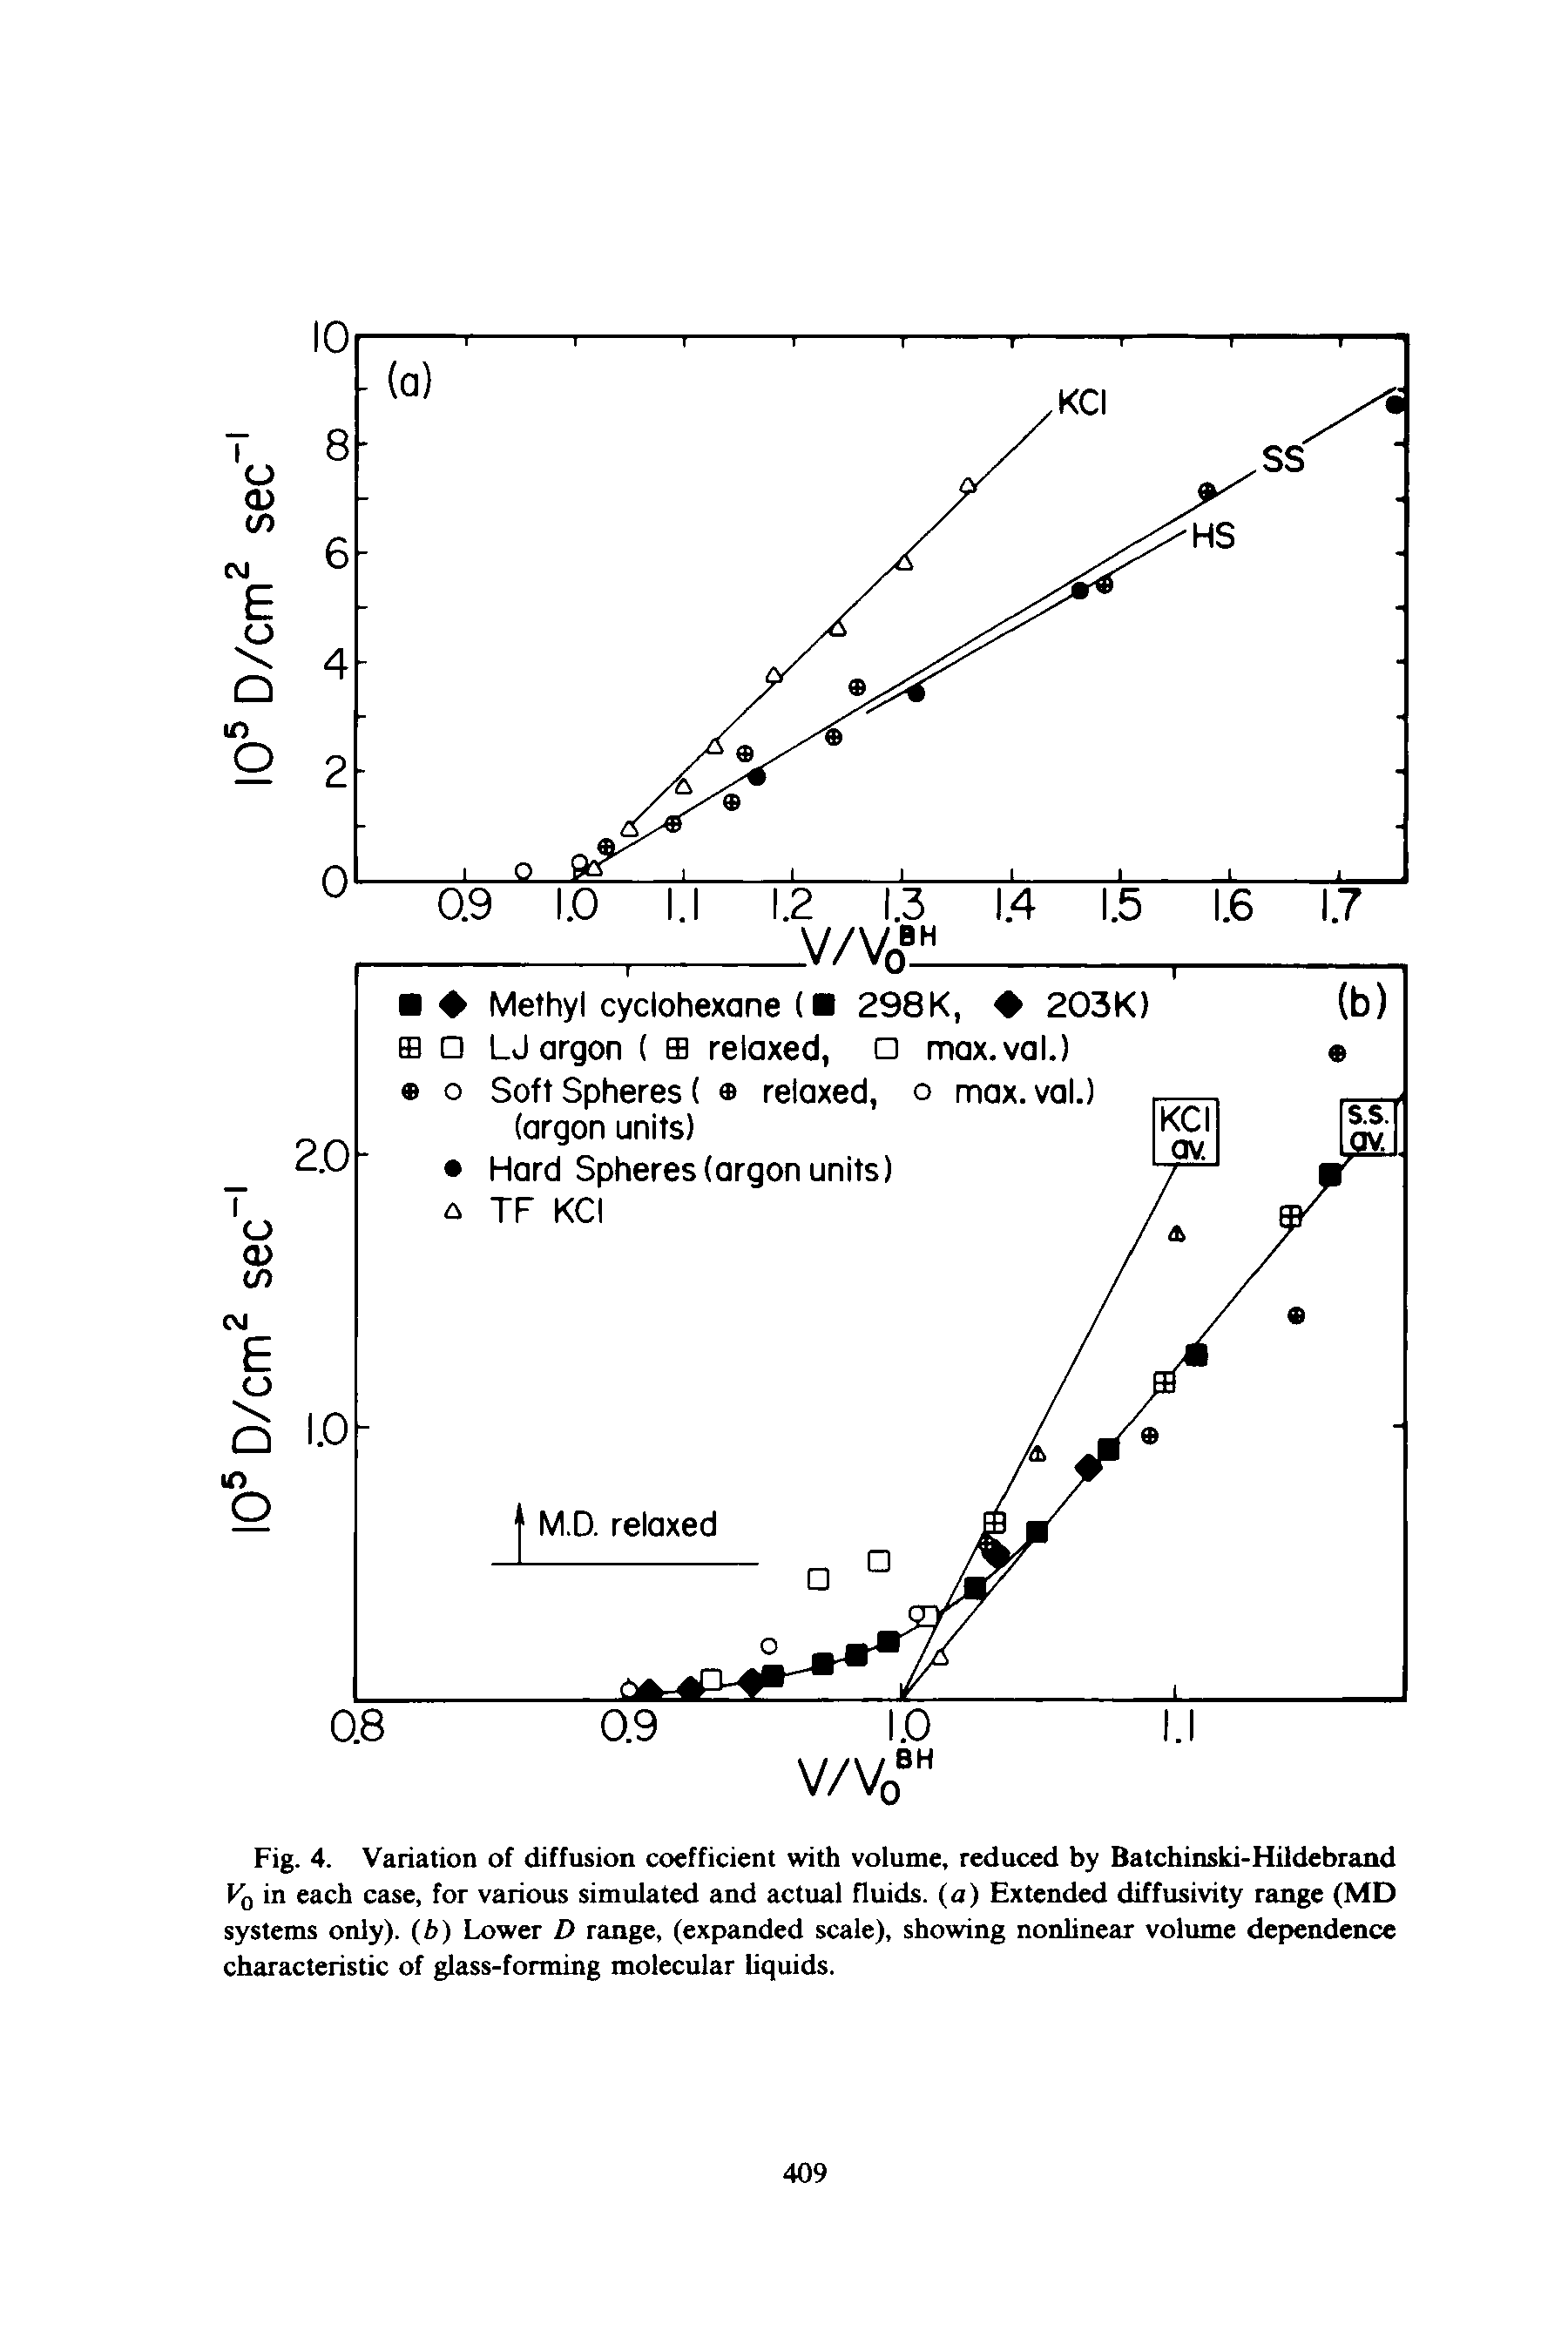 Fig. 4. Variation of diffusion coefficient with volume, reduced by Batchinski-Hildebrand Vq in each case, for various simulated and actual fluids, (a) Extended diffusivity range (MD systems only), (h) Lower D range, (expanded scale), showing nonhnear volume dependence characteristic of glass-forming molecular liquids.